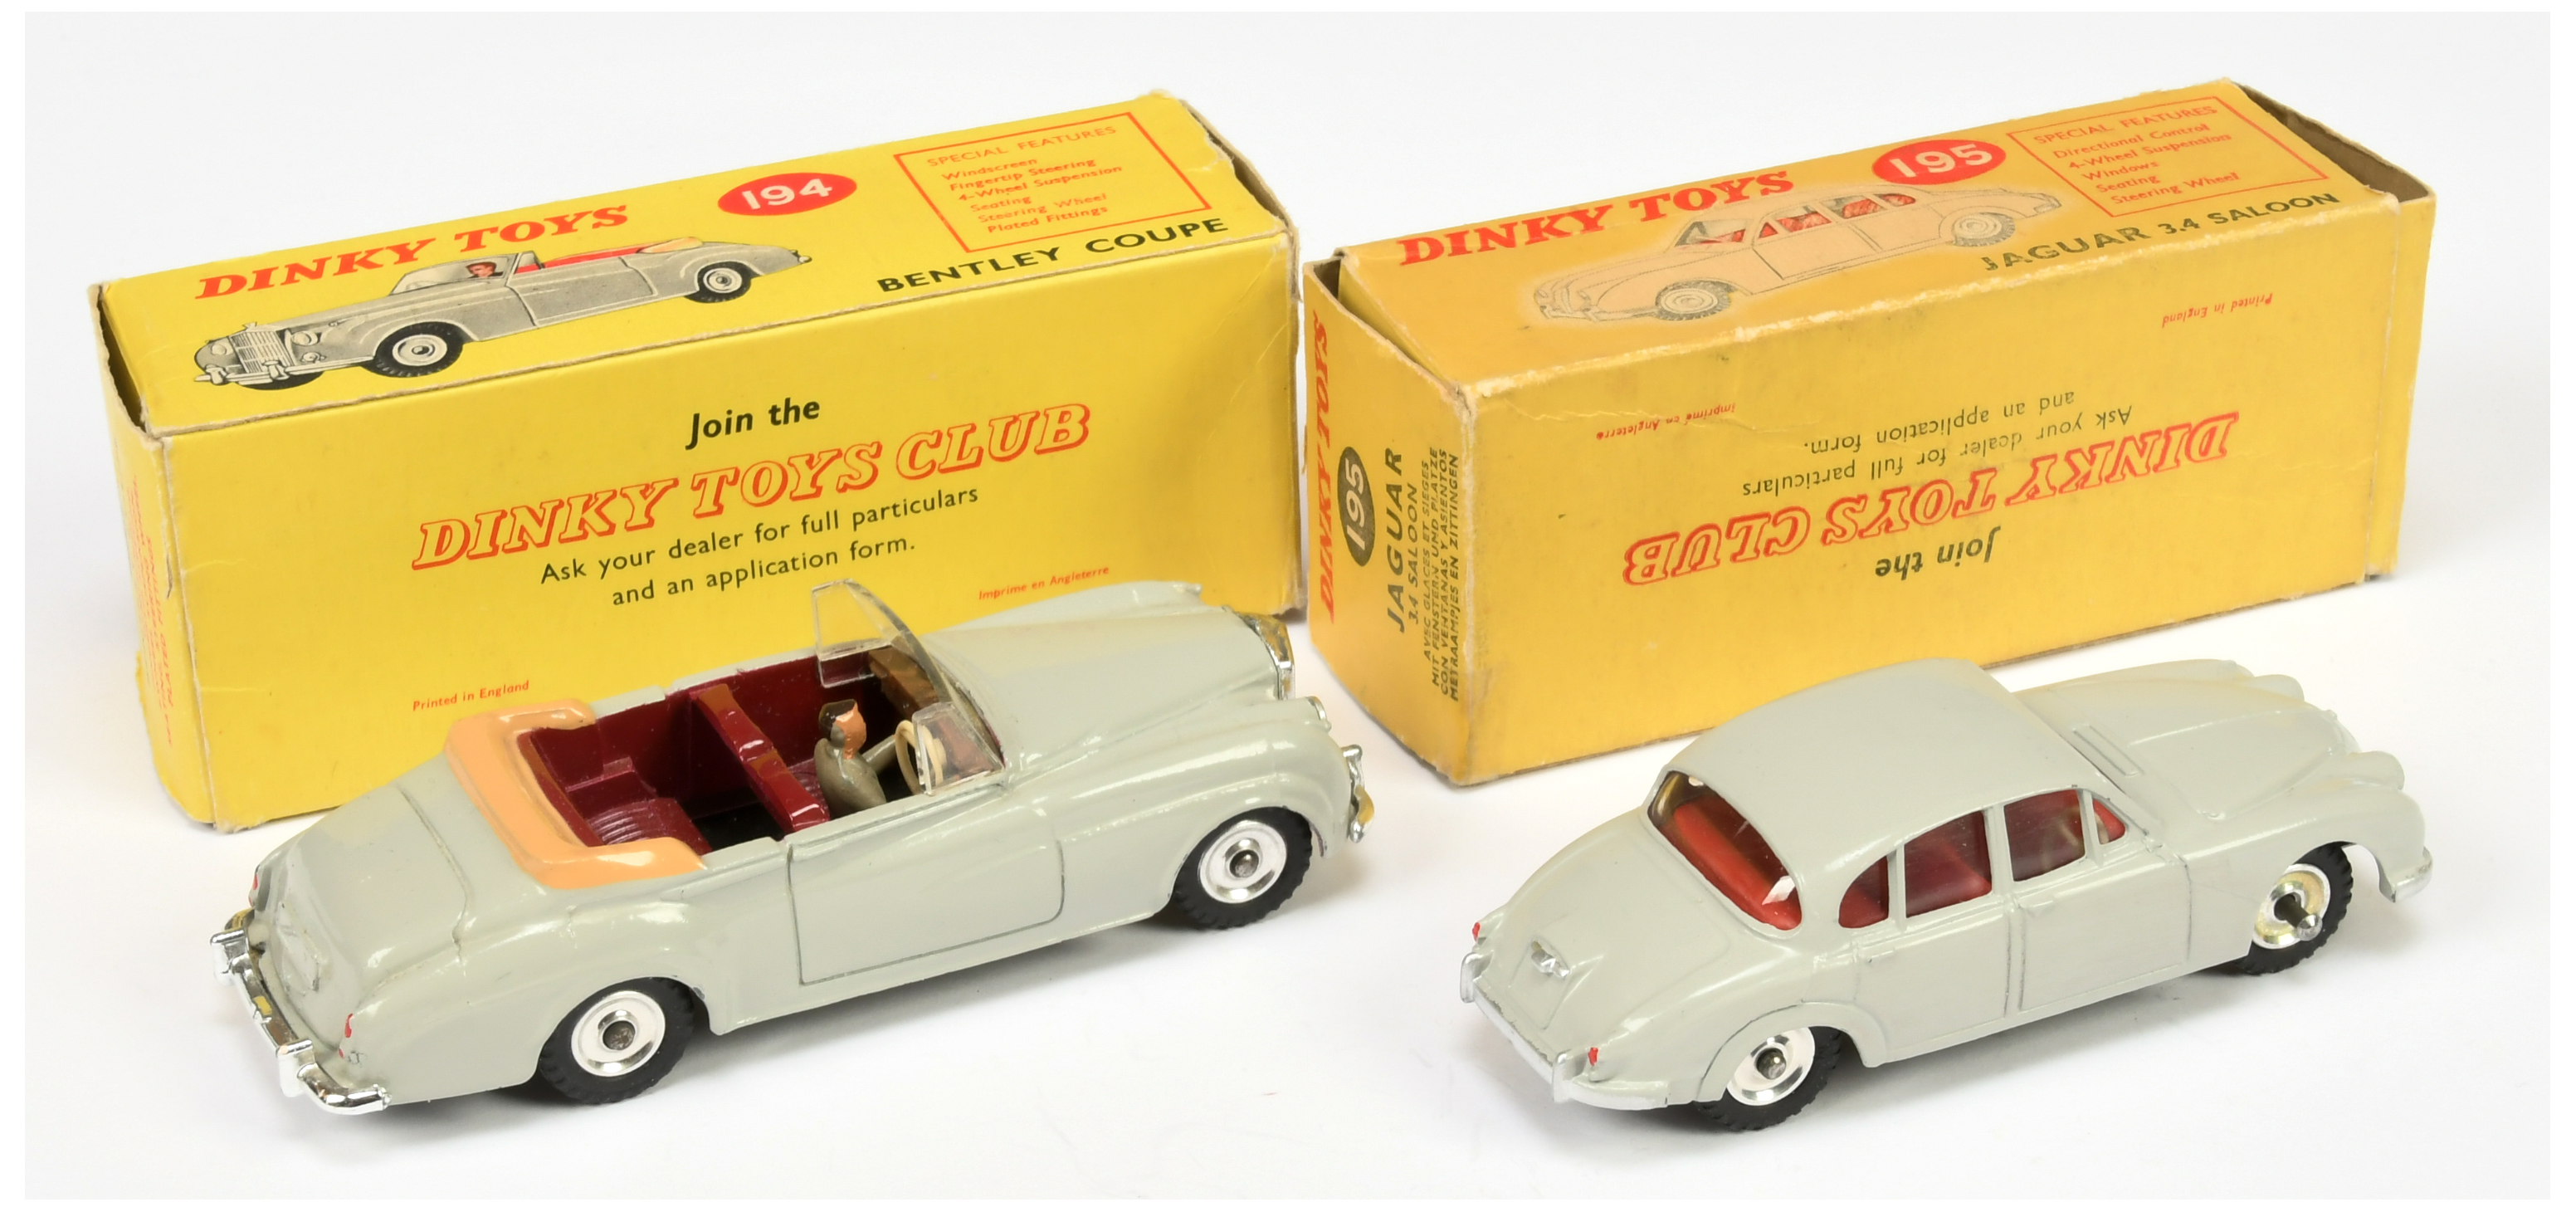 Dinky Toys 194 Bentley Coupe - Grey body, maroon interior with figure, chrome trim and spun hubs ... - Image 2 of 2